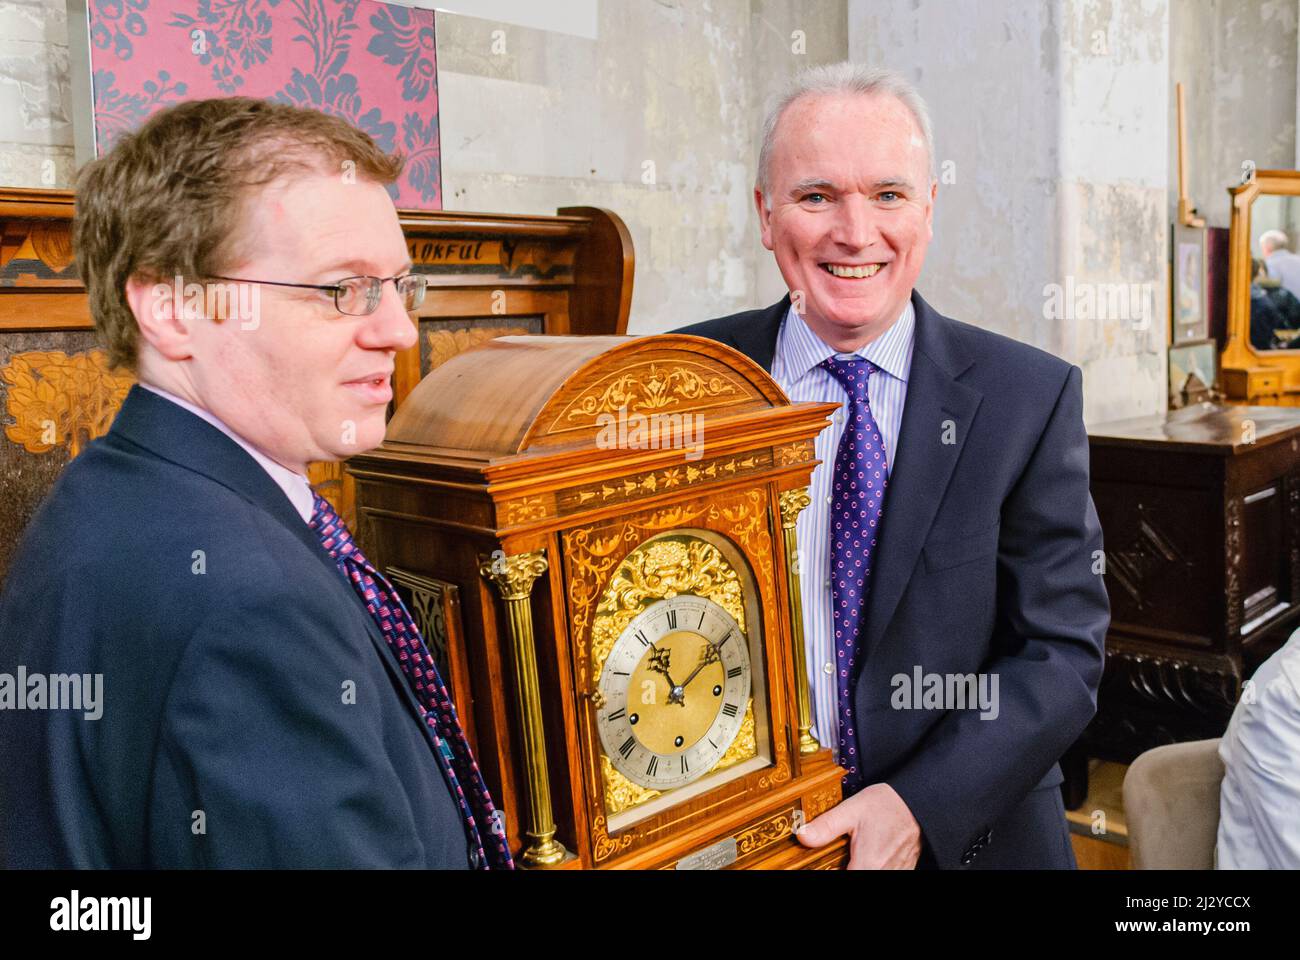 Belfast, Northern Ireland. 13th April 2008.  Allstate's Bro McFerran holds an antique clock as the Antiques Roadshow is filmed at the Titanic Drawing Office, Belfast Stock Photo